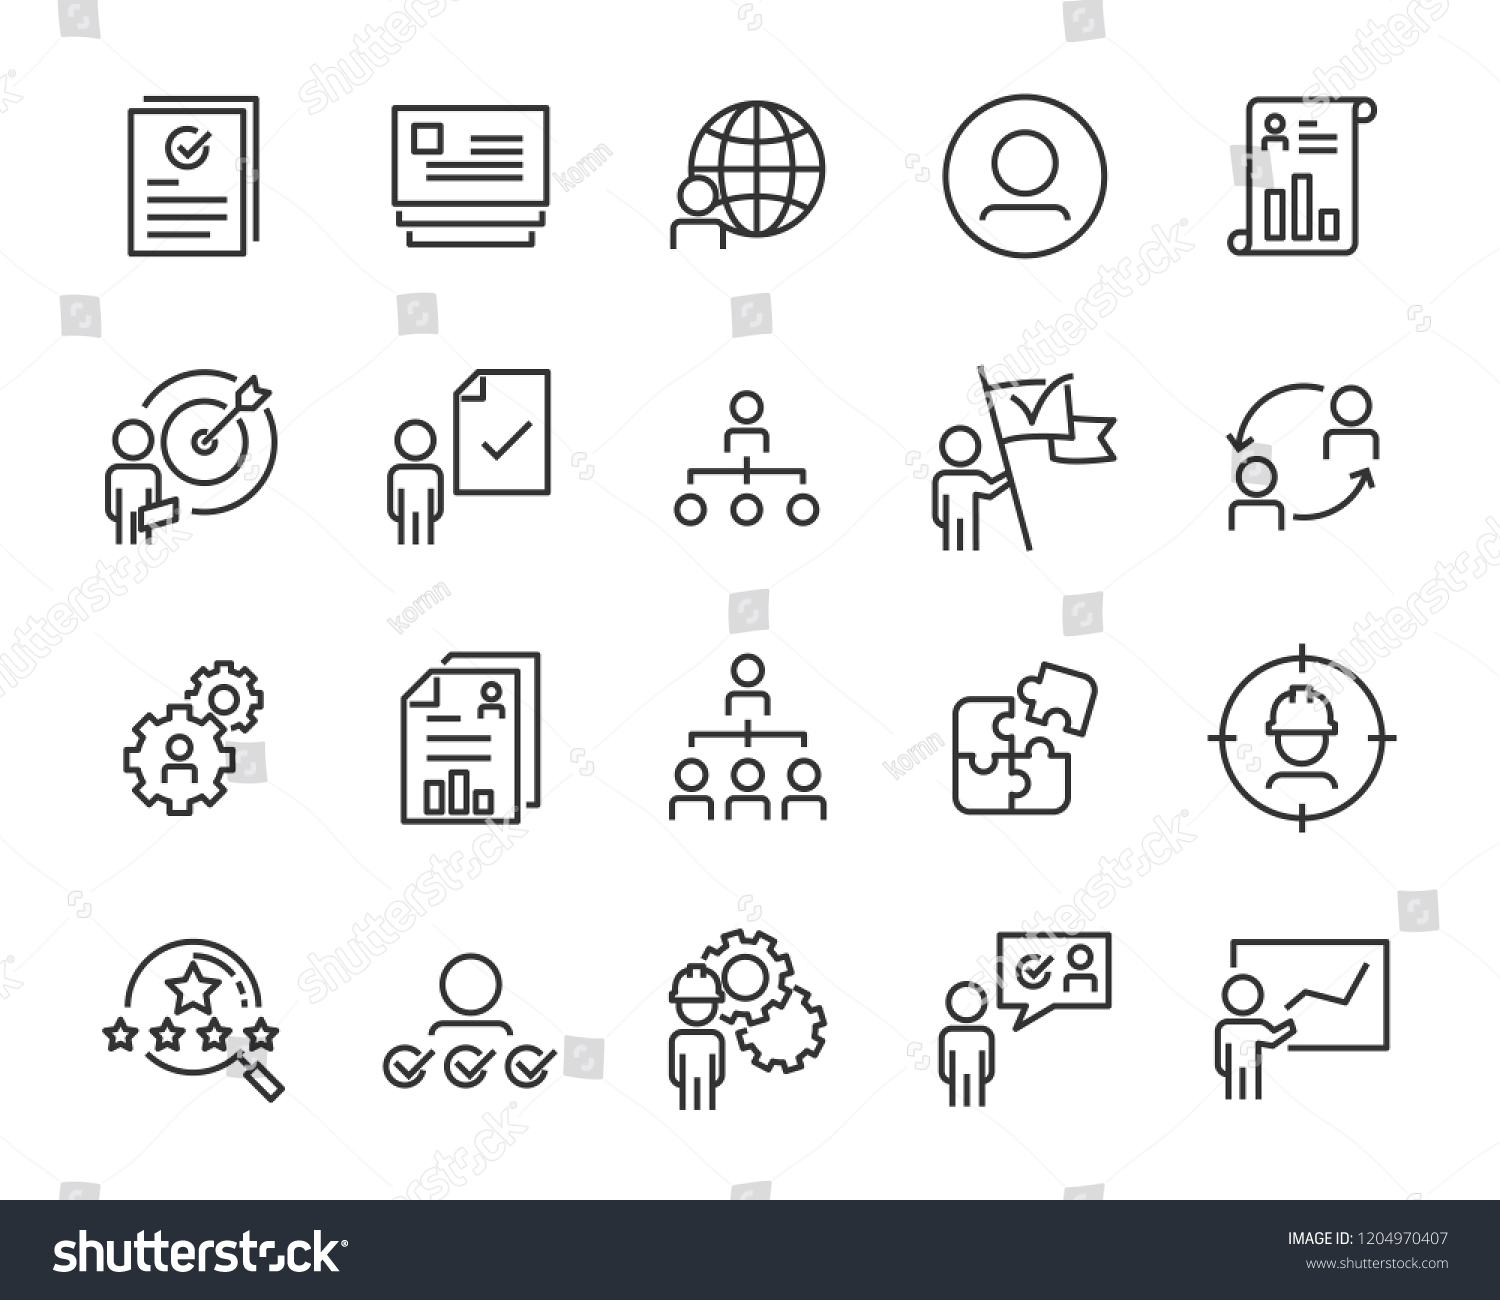 set of work icons, such as job, search, business, training, skills #1204970407